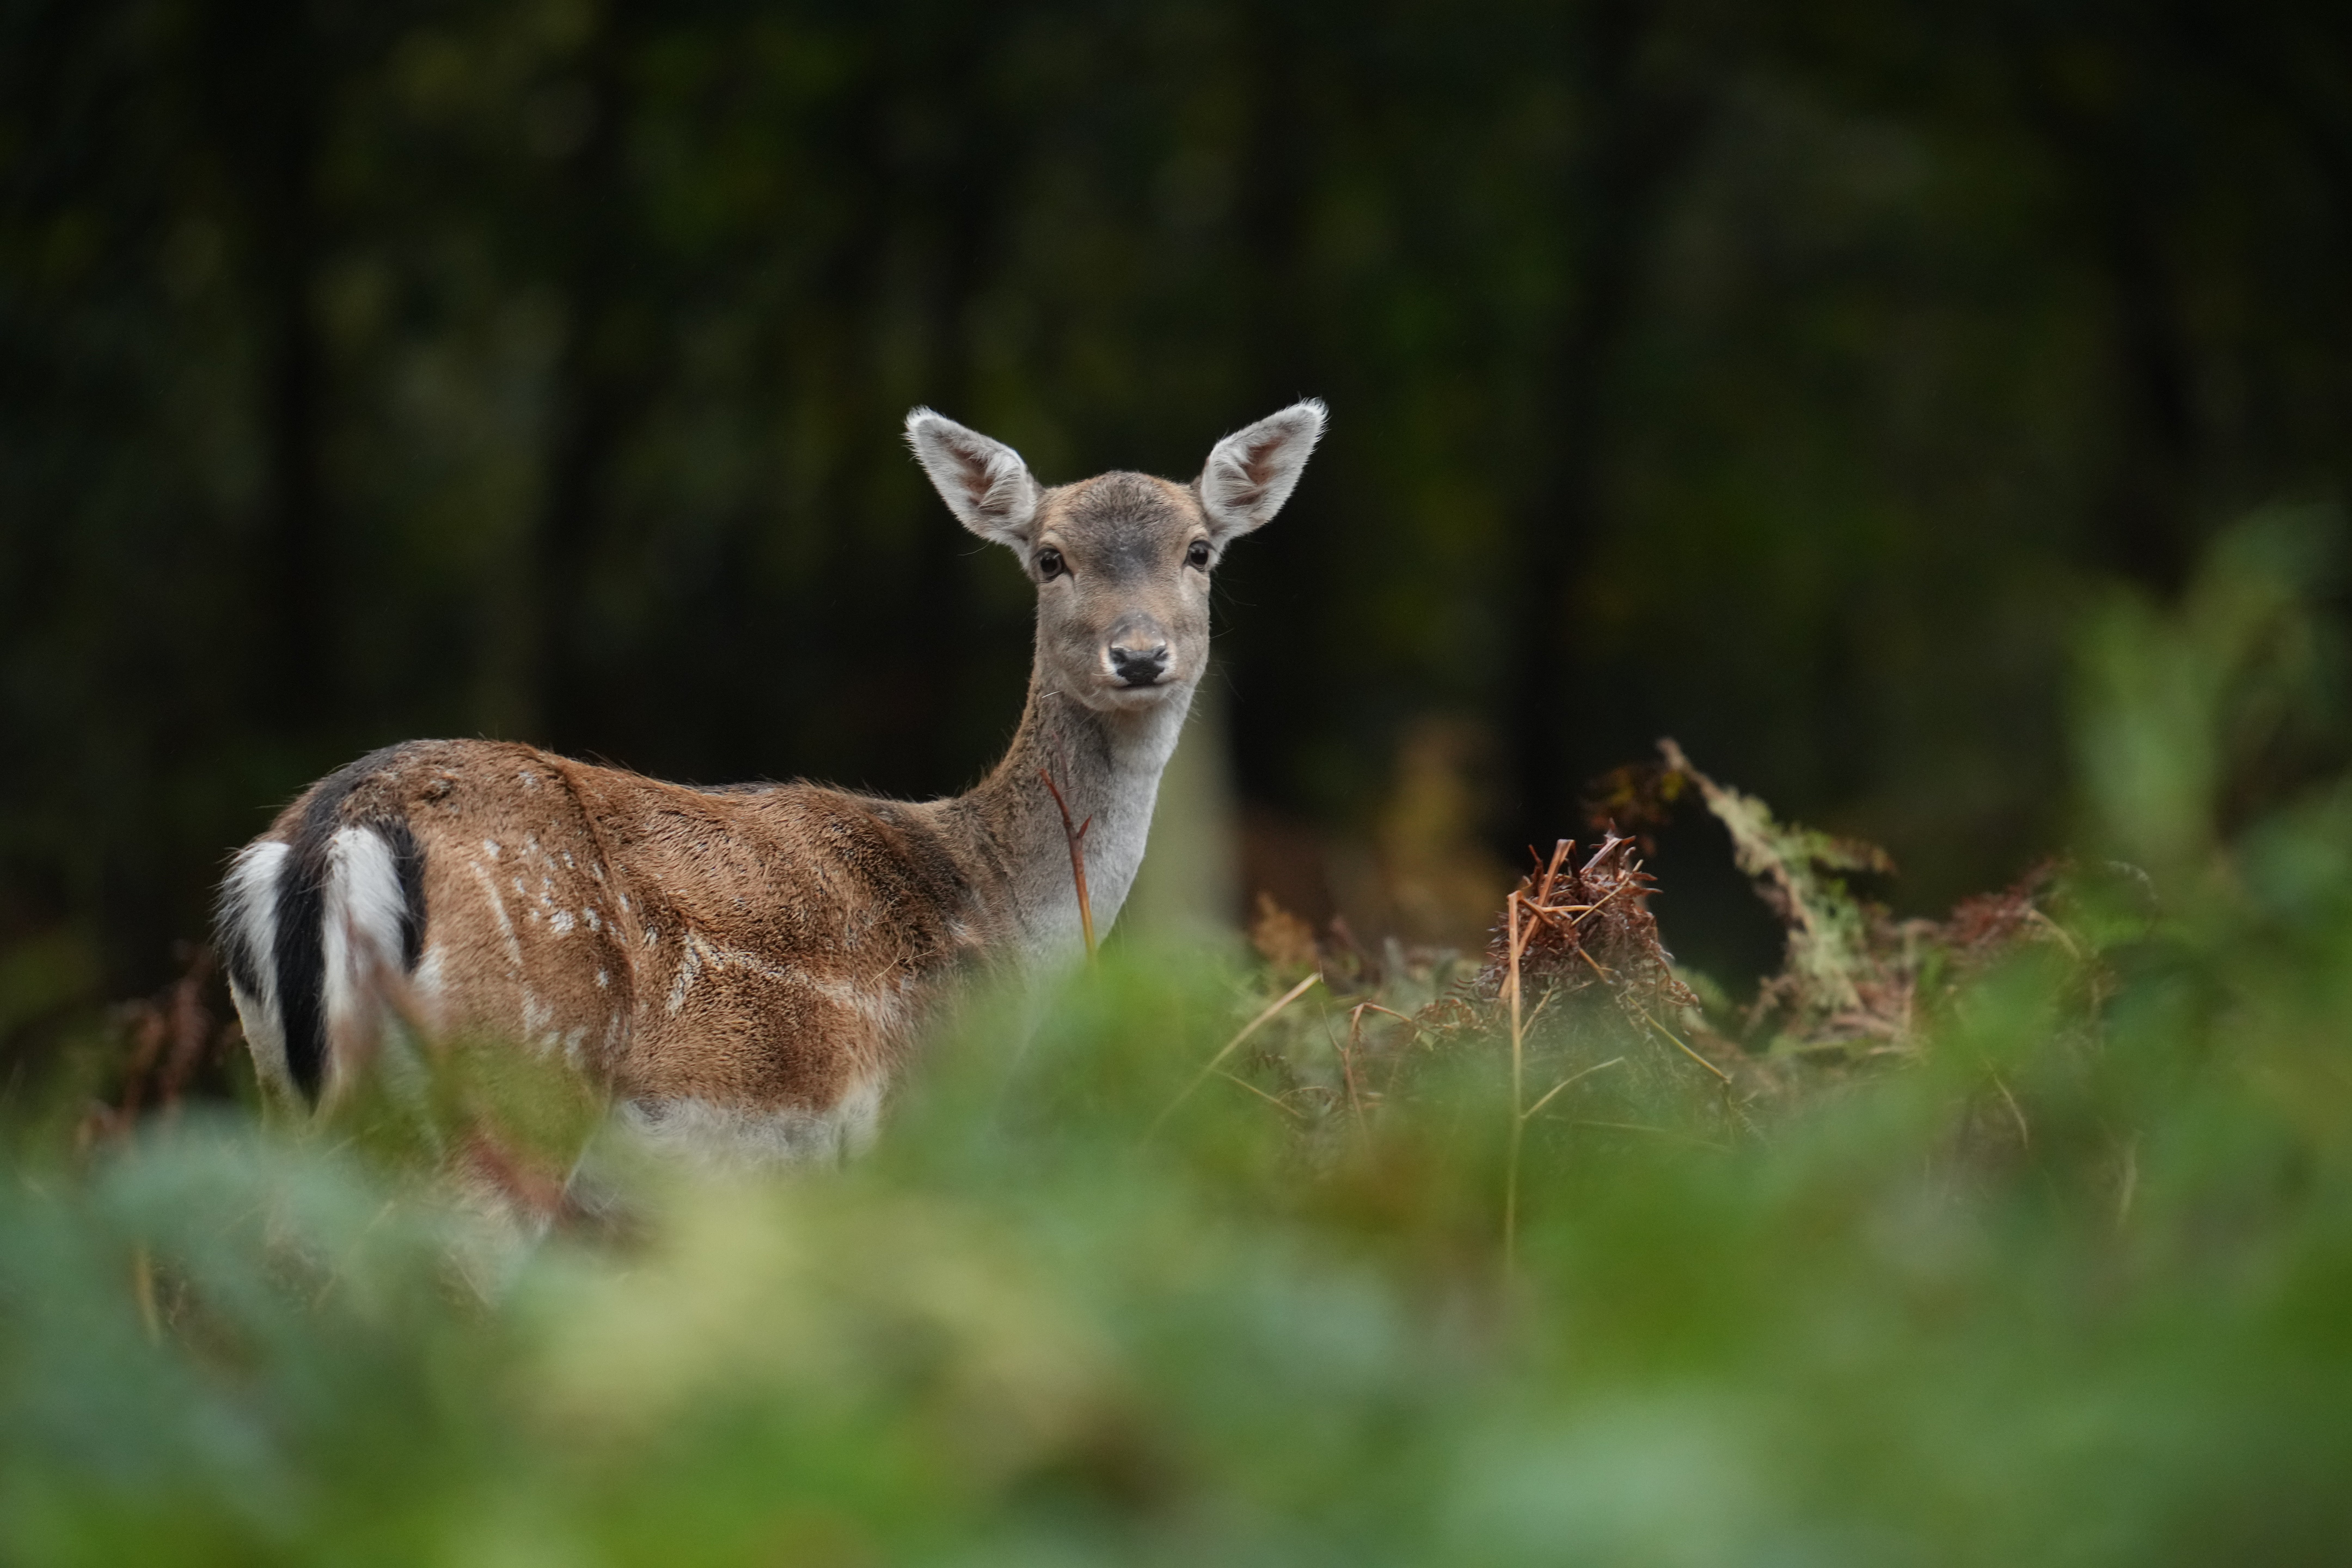 The UK has seen increases in deer numbers, which then eat tree growth